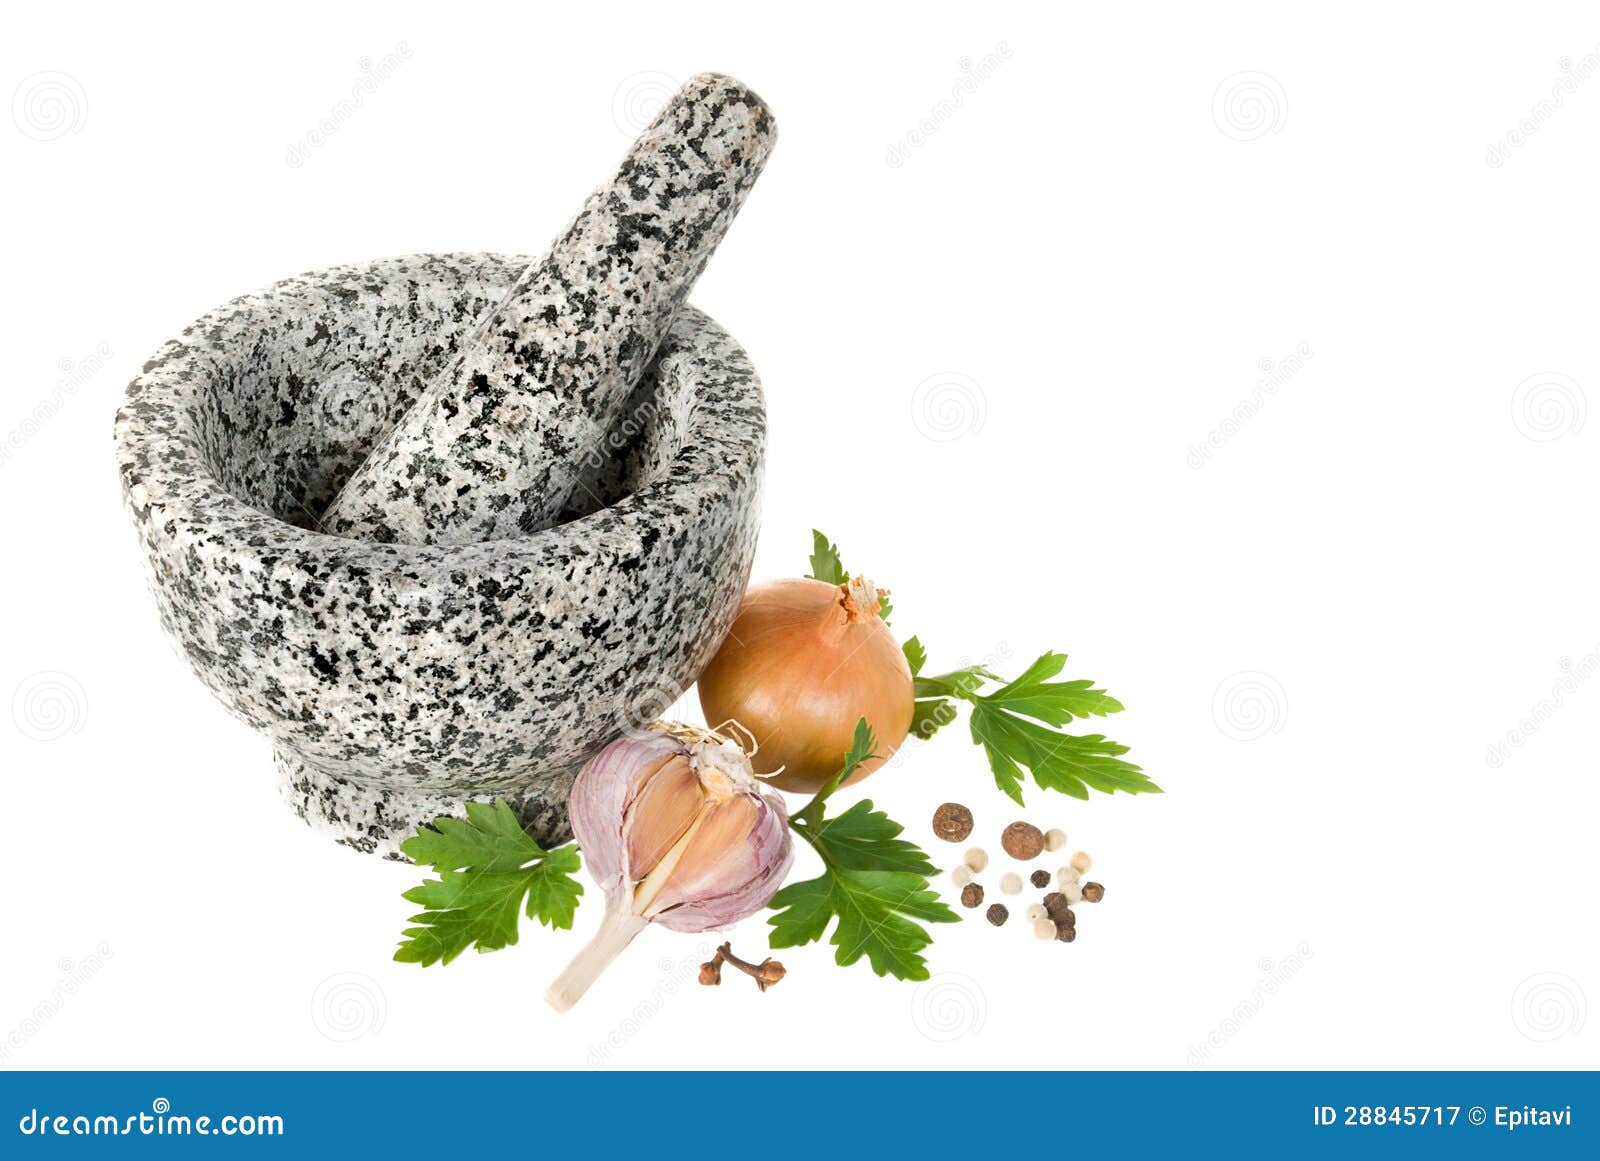 stone pounder with spices on a white background